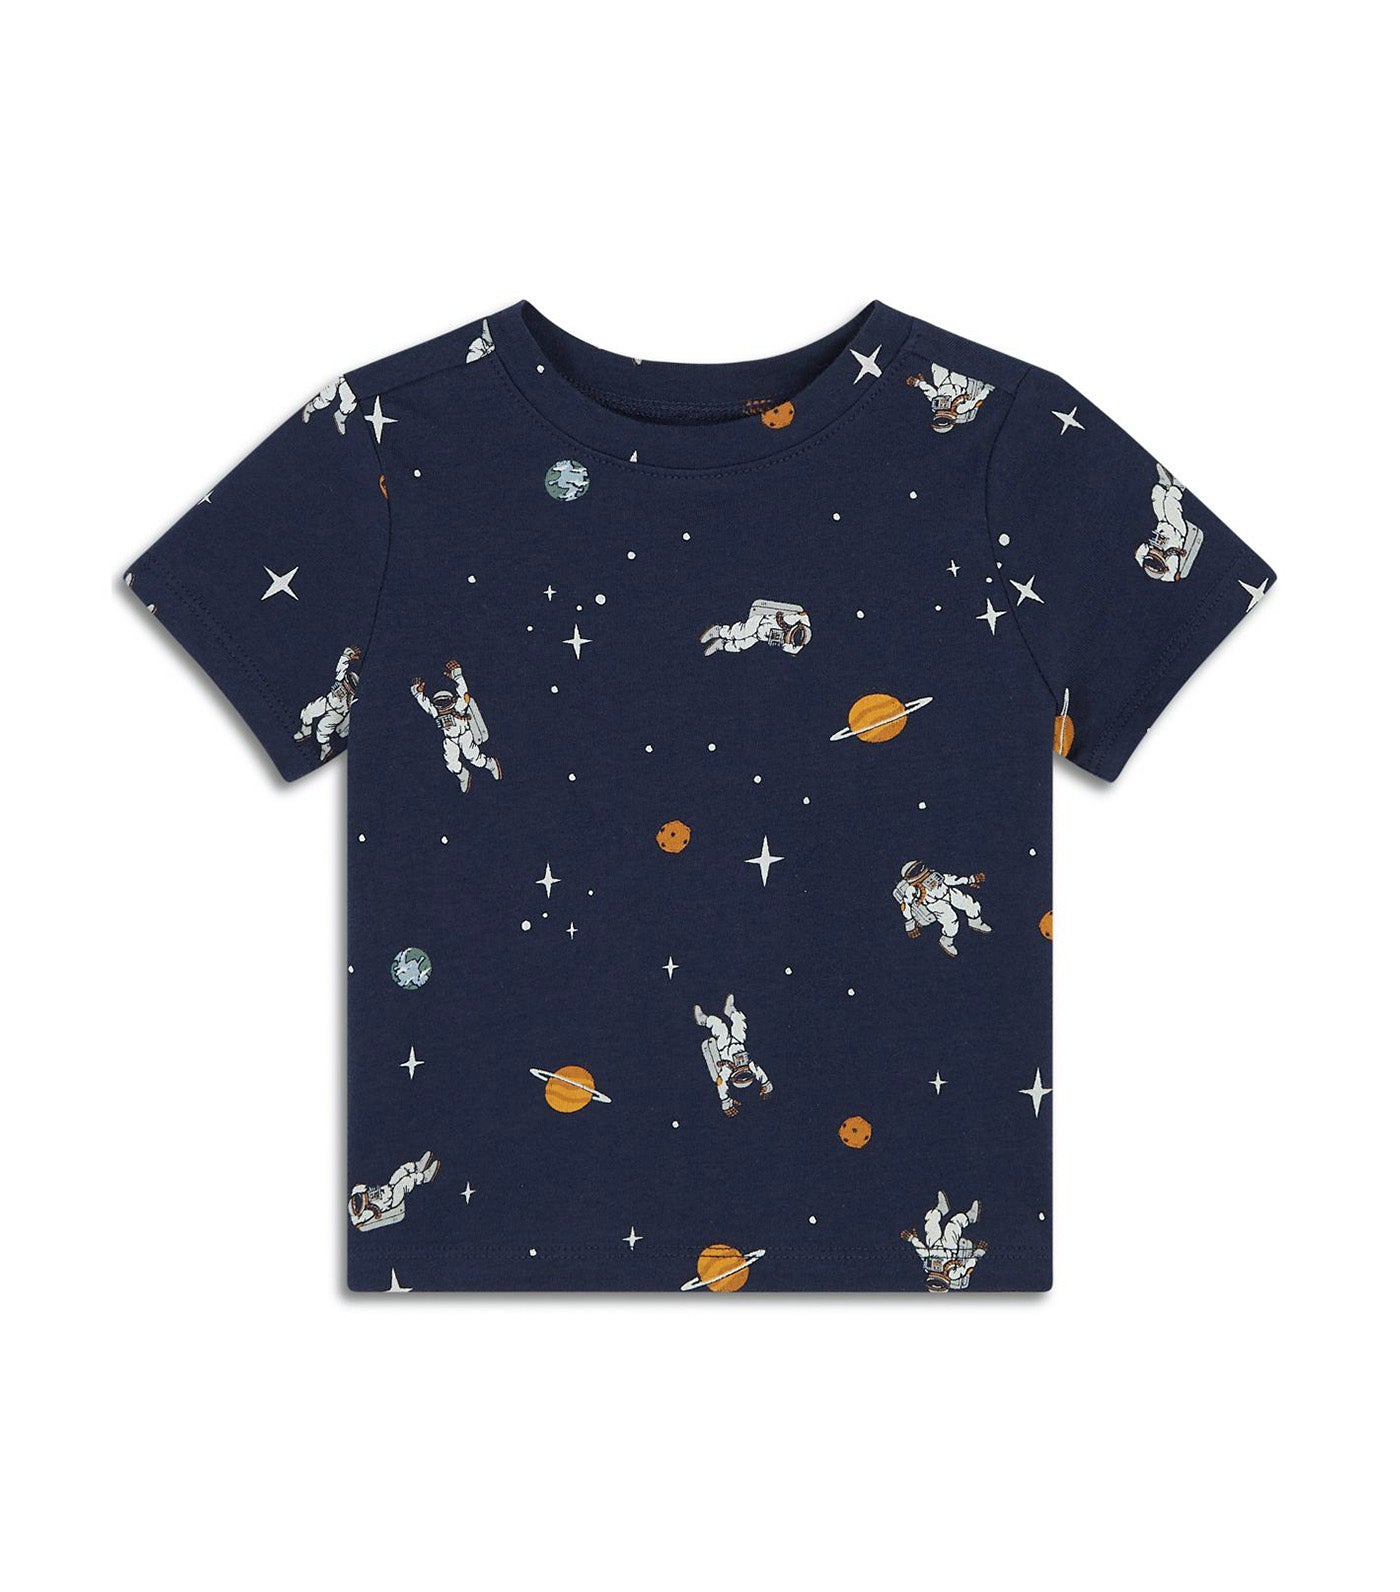 Unisex Crew-Neck Printed T-Shirt for Toddler - Deep Space Blue